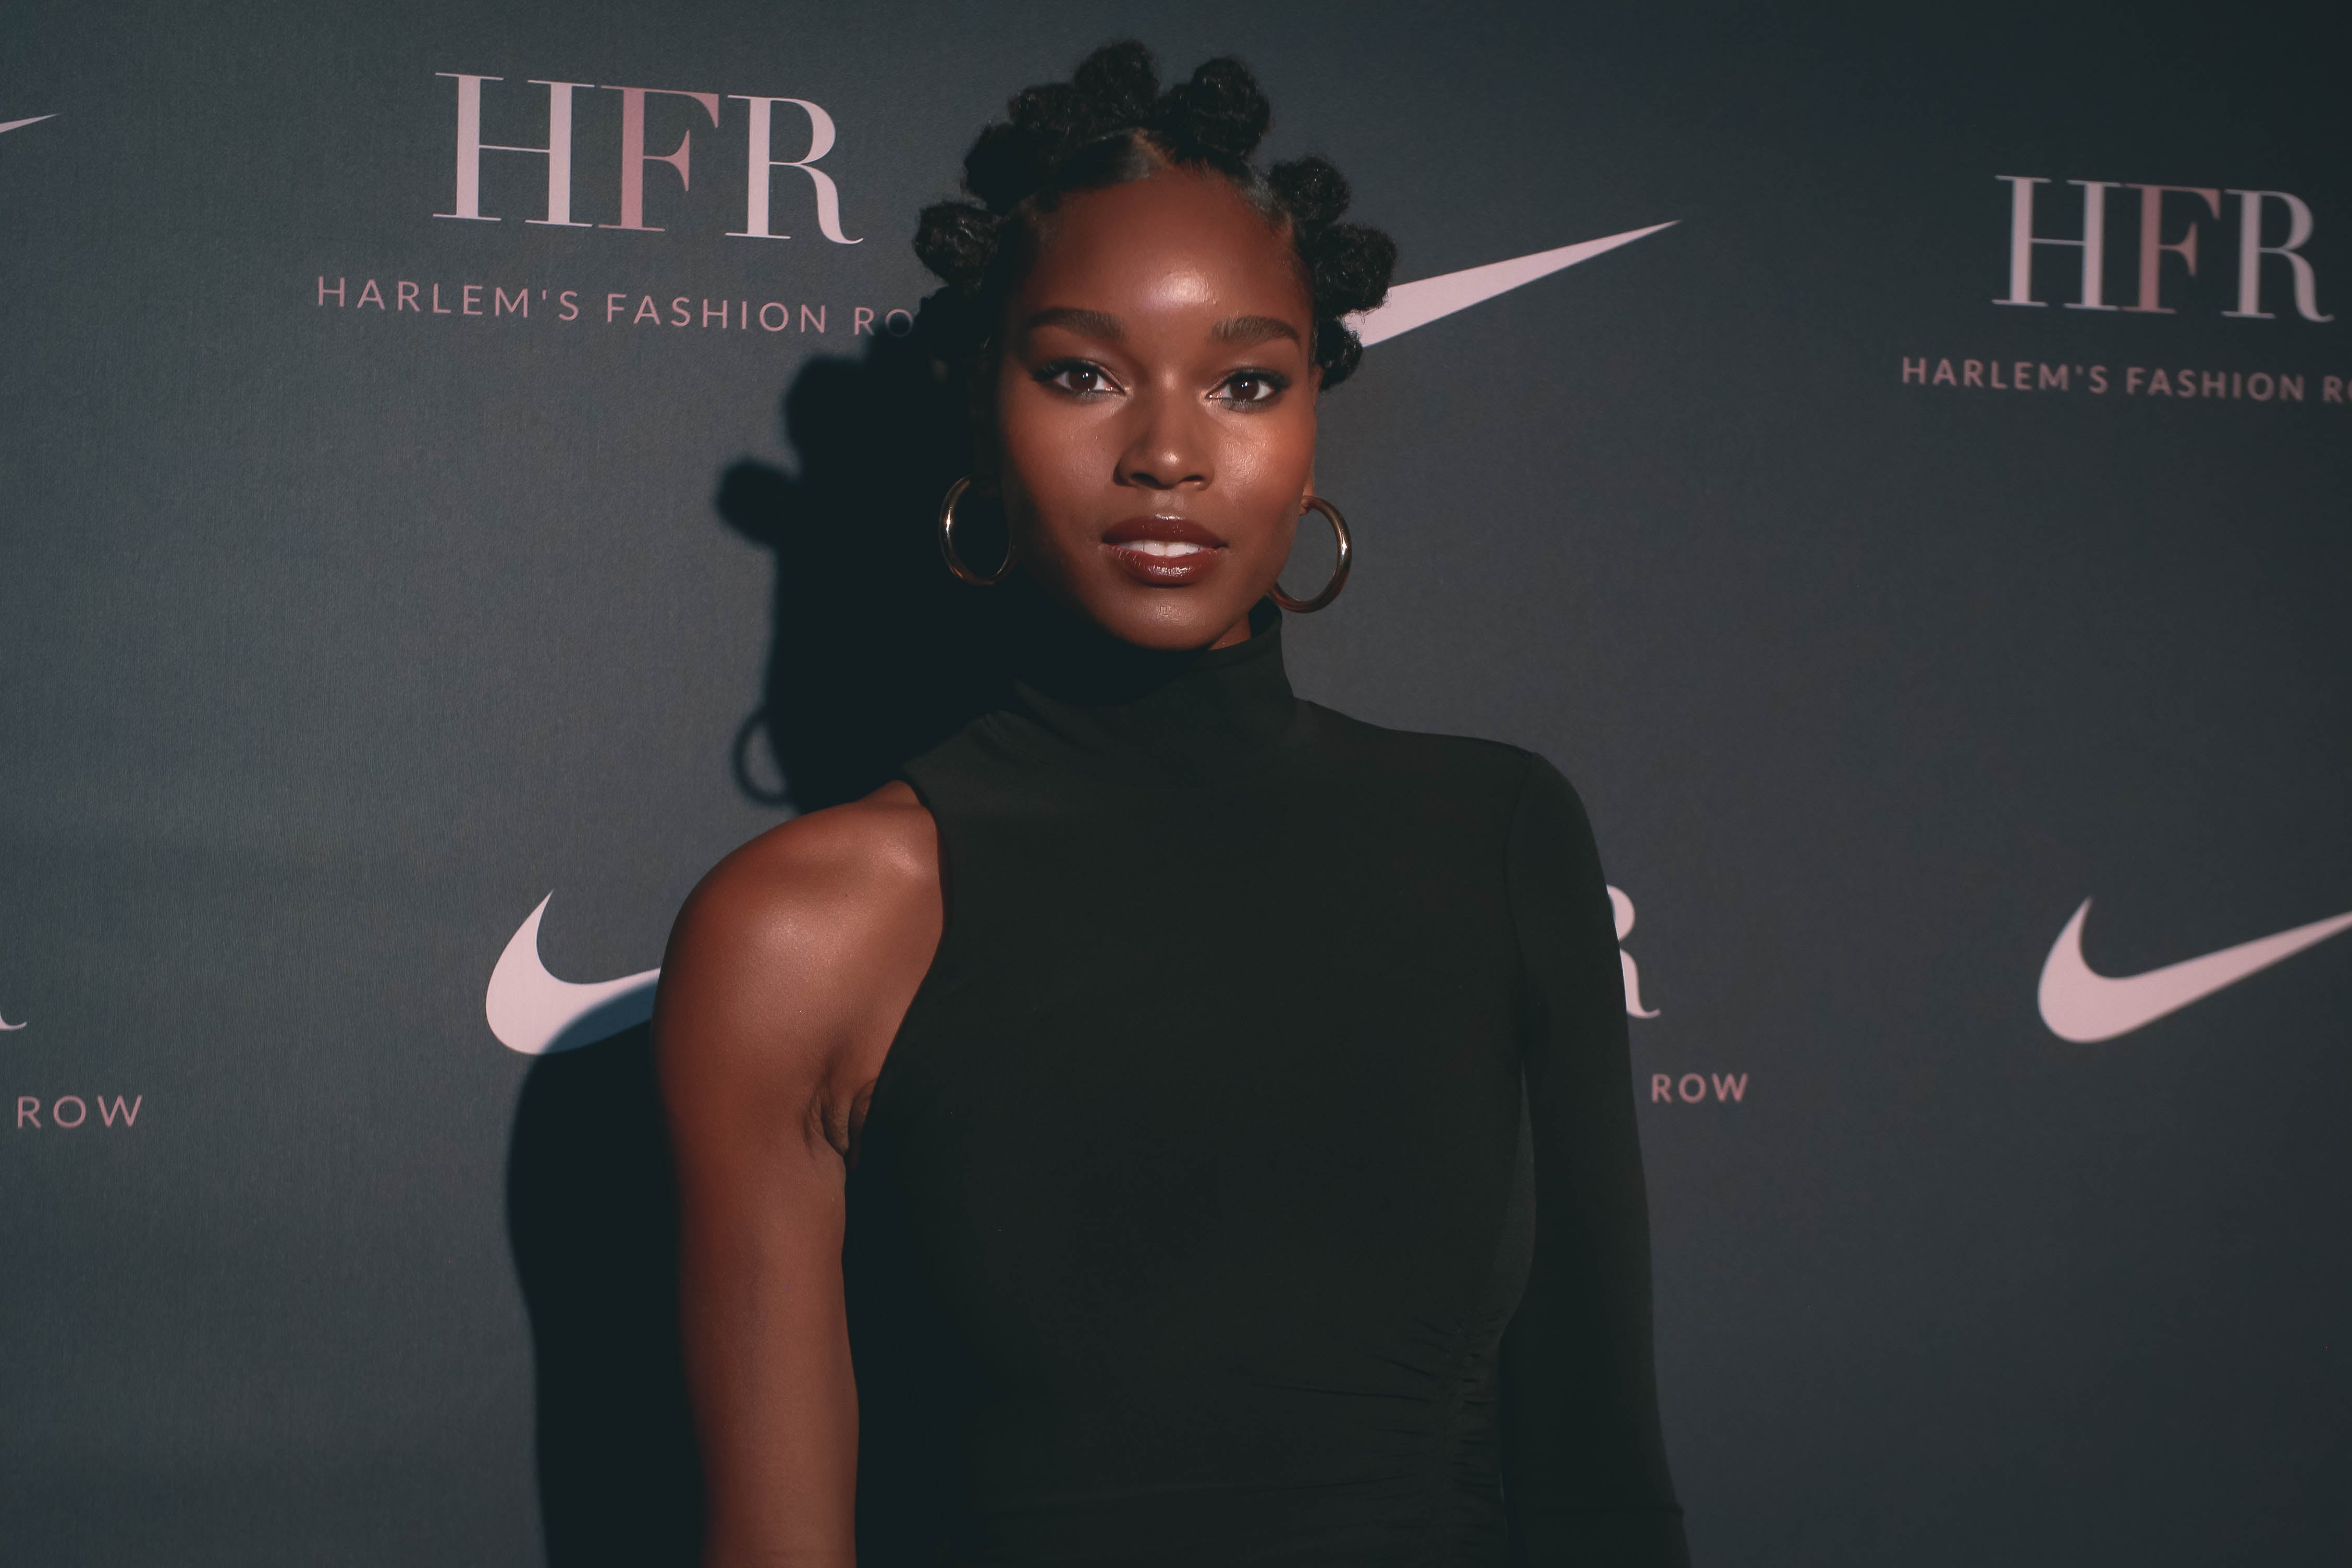 The Stars Align For Harlem’s Fashion Row Annual Dinner And Awards Ceremony